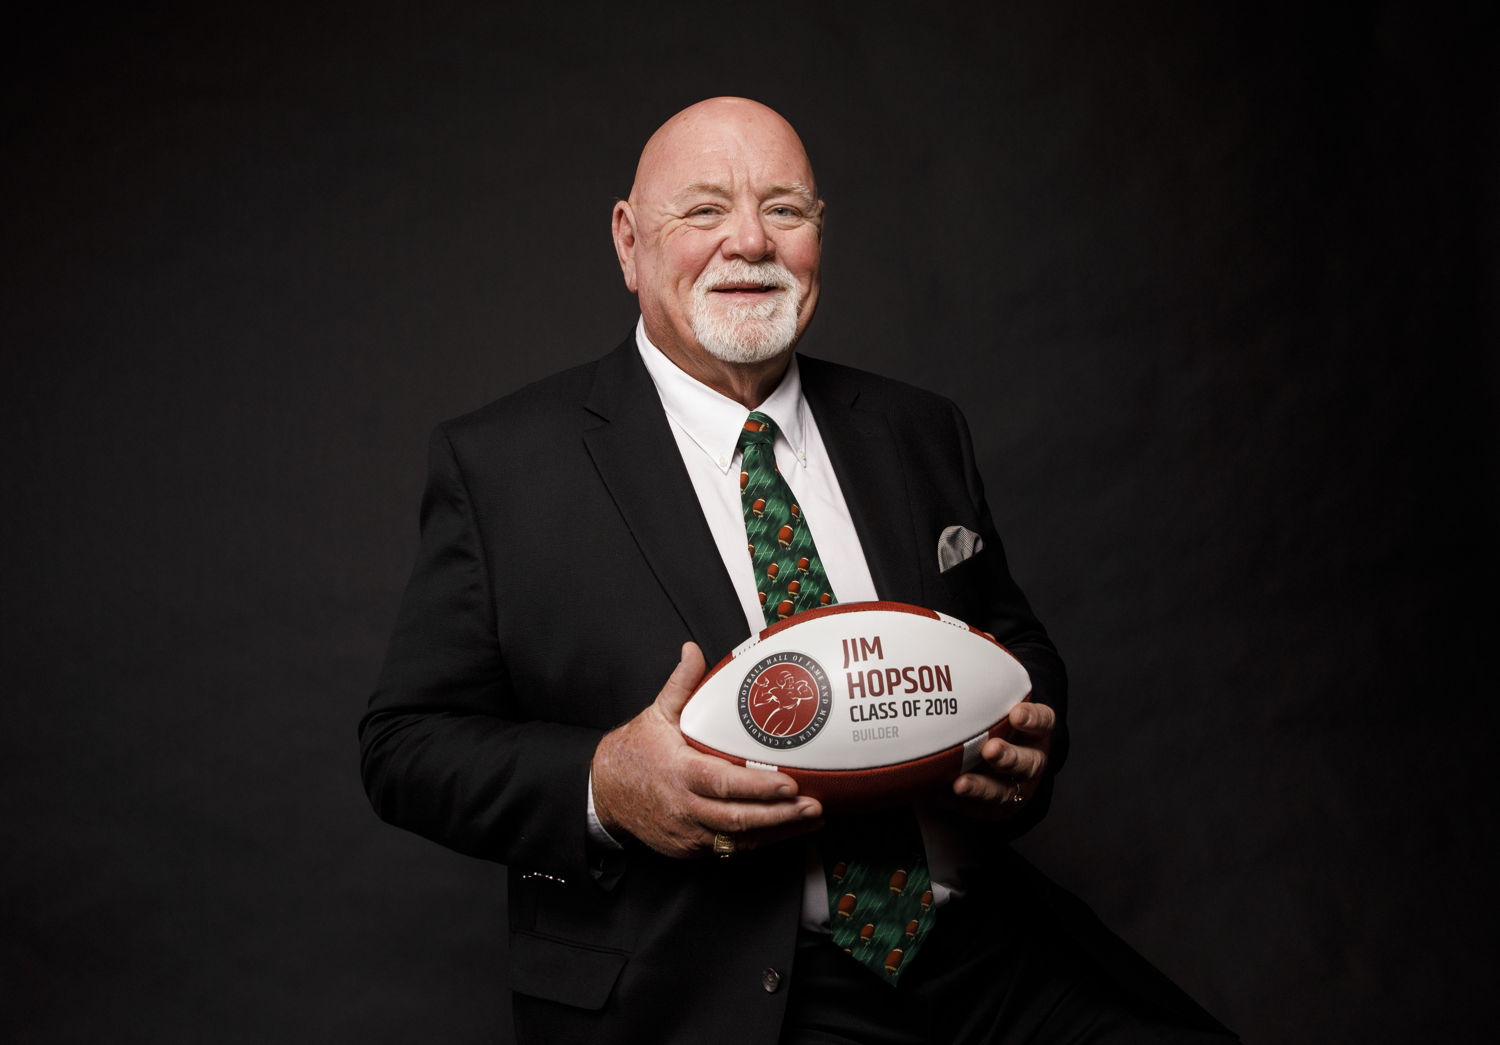 Jim Hopson, Canadian Football Hall of Fame Class of 2019 Inductee. Photo credit: CFL.ca/Kevin Sousa